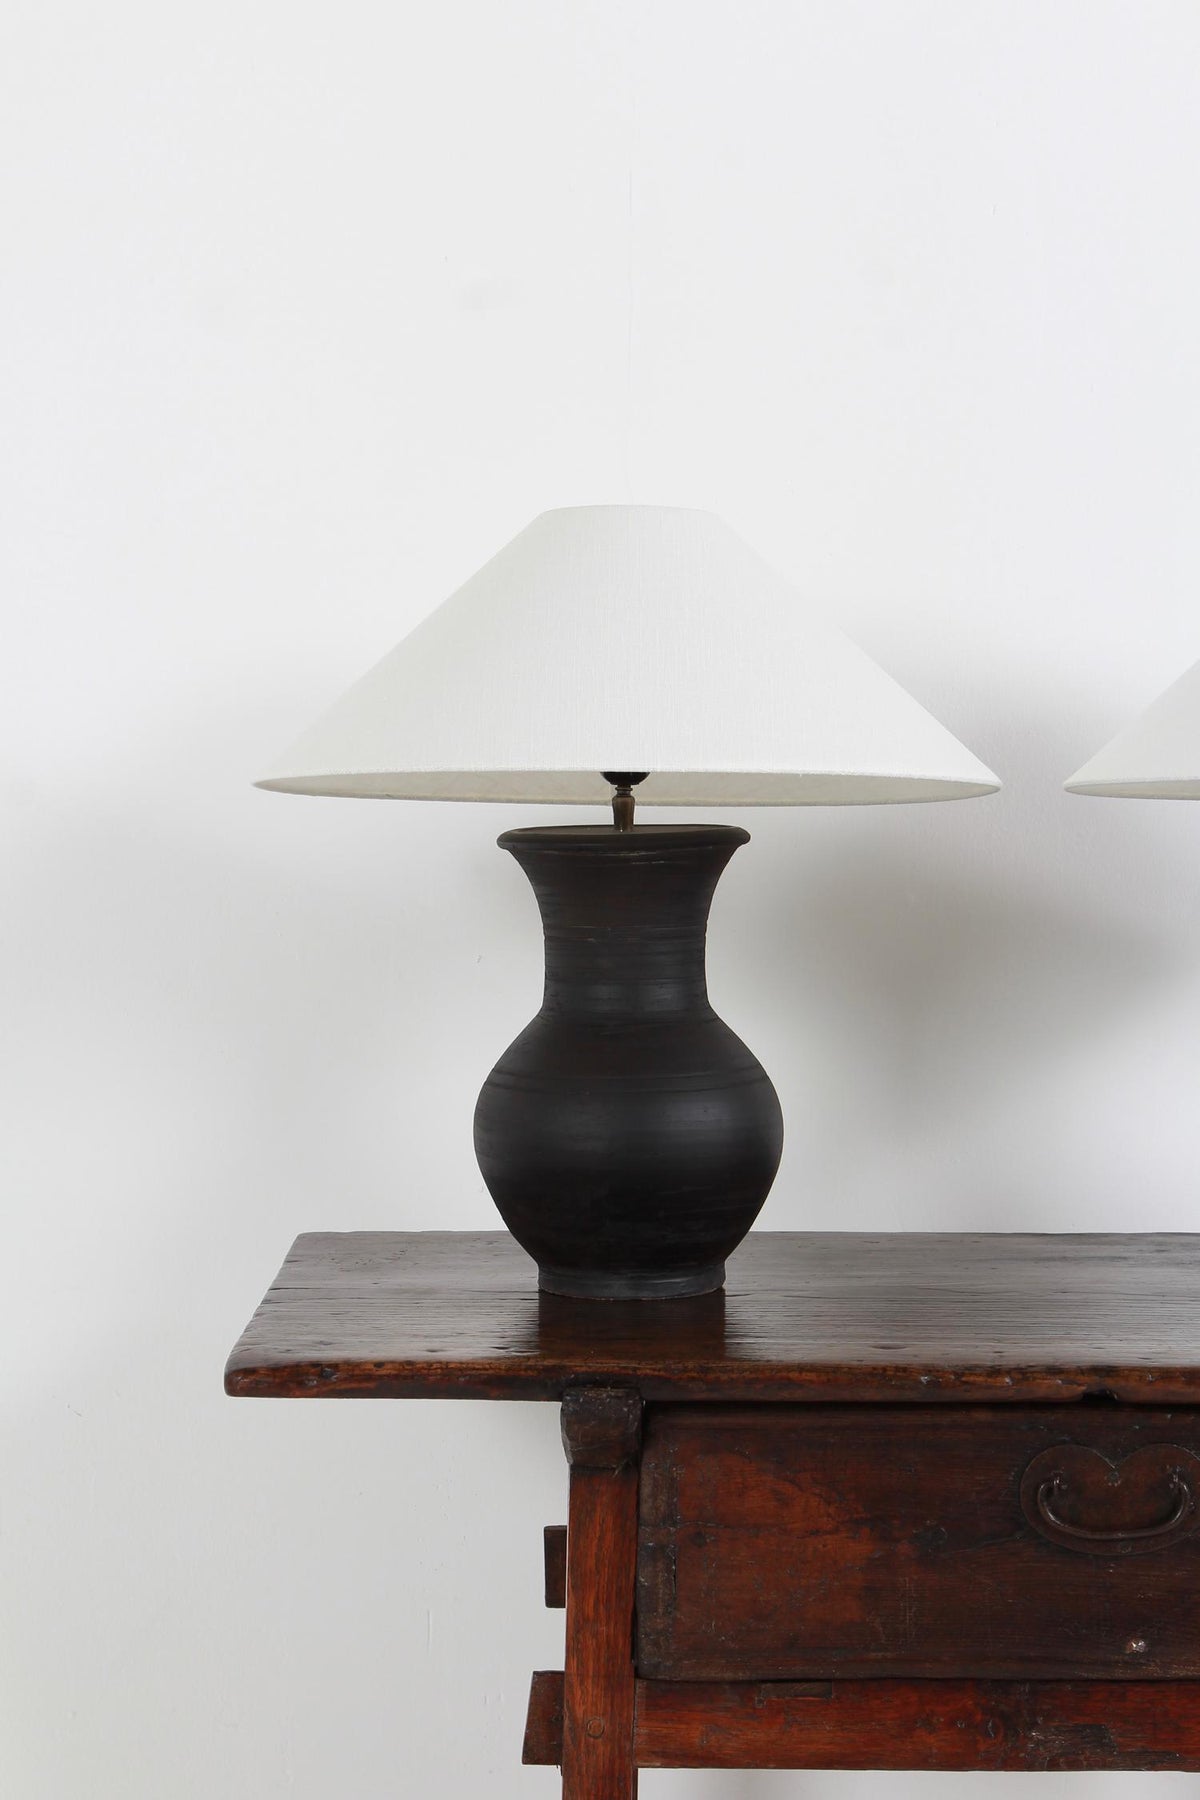 PAIR OF CHINESE HAN-STYLE LAMPS WITH HANDMADE BELGIAN WHITE LINEN SHADES